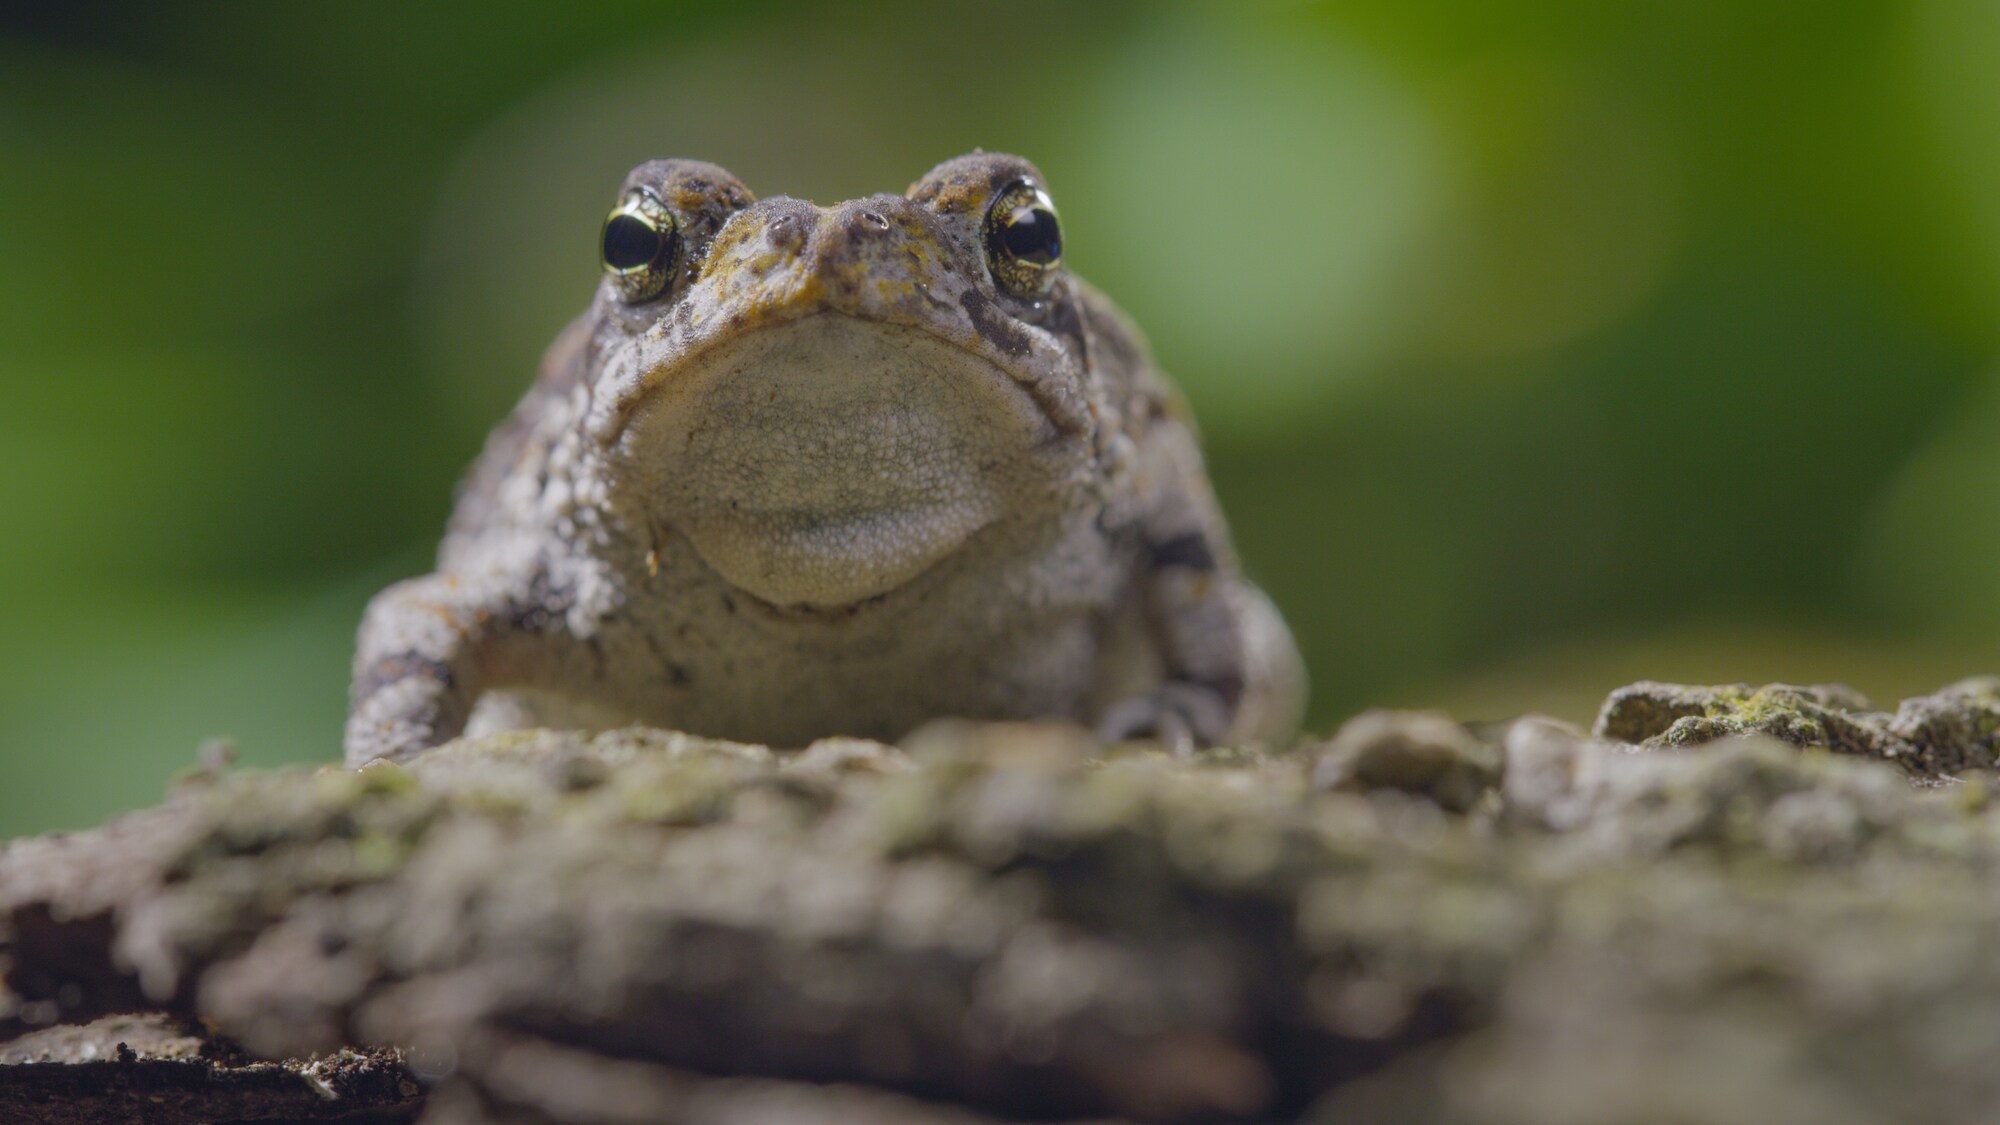 An Oak Toad on the hunt for dinner amongst the tropical forests of southern Florida. (National Geographic for Disney+)